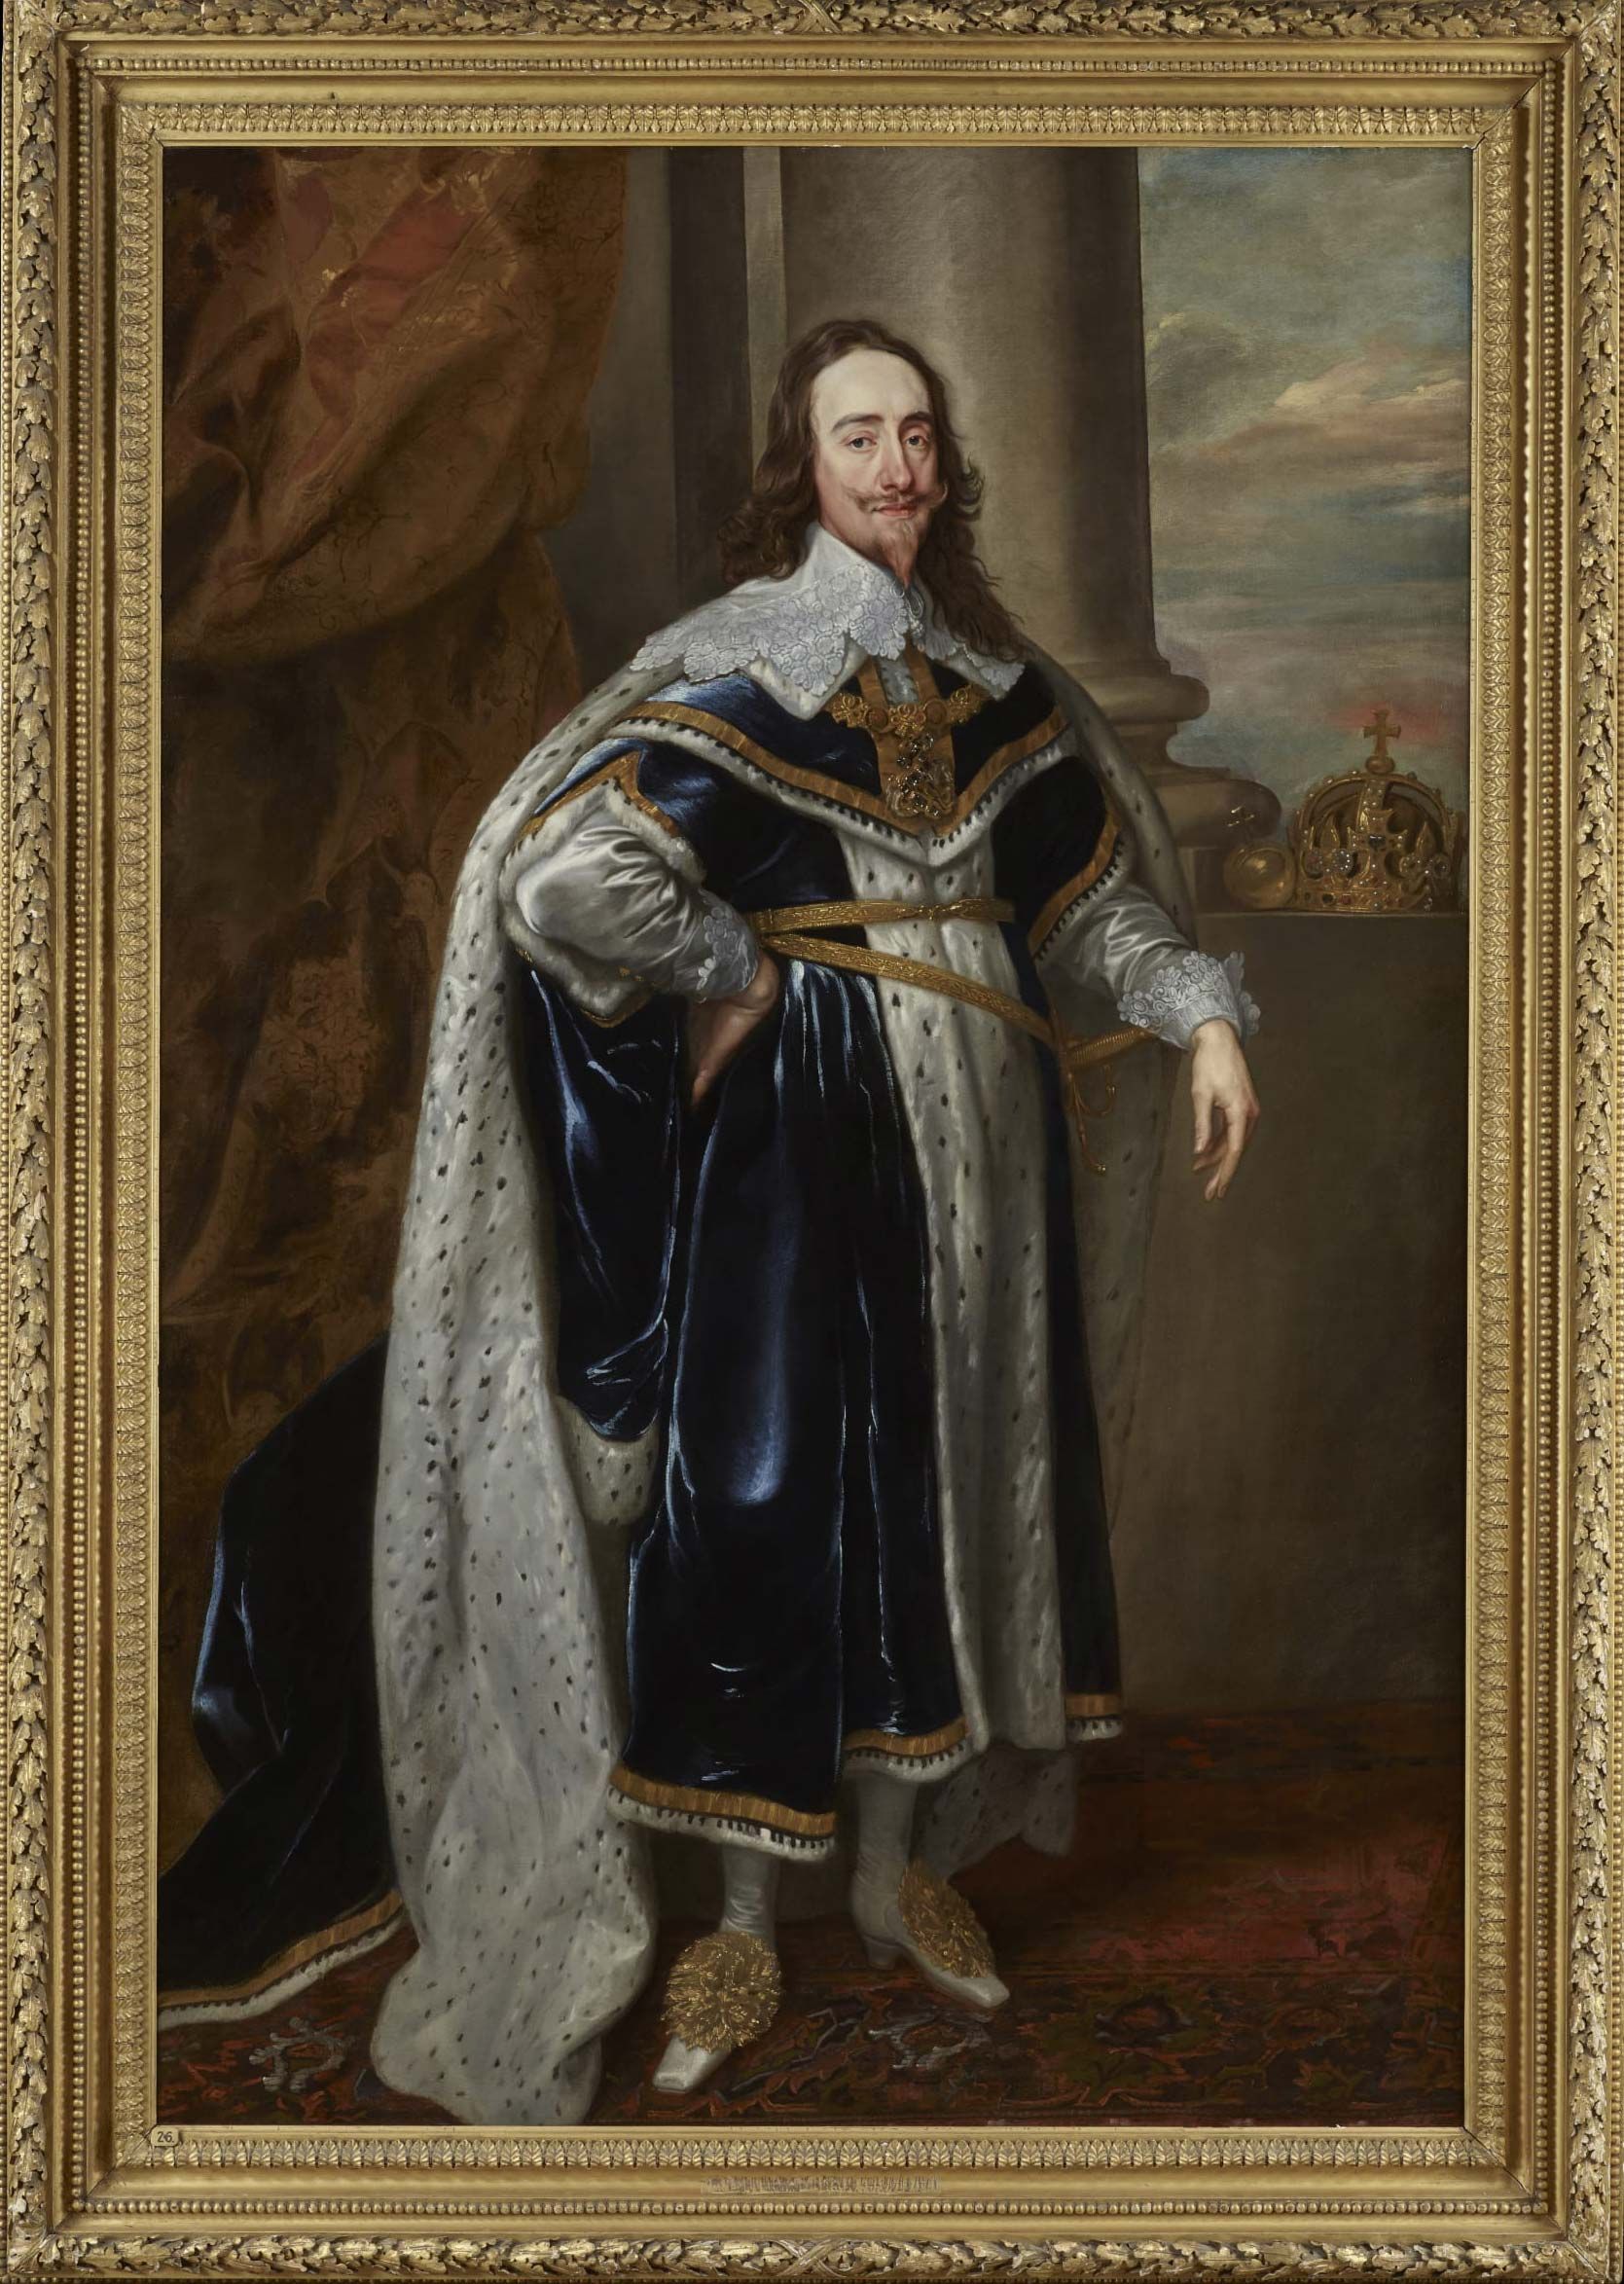 Portrait of King Charles I in his Robes of State by Van Dyck, 1636.